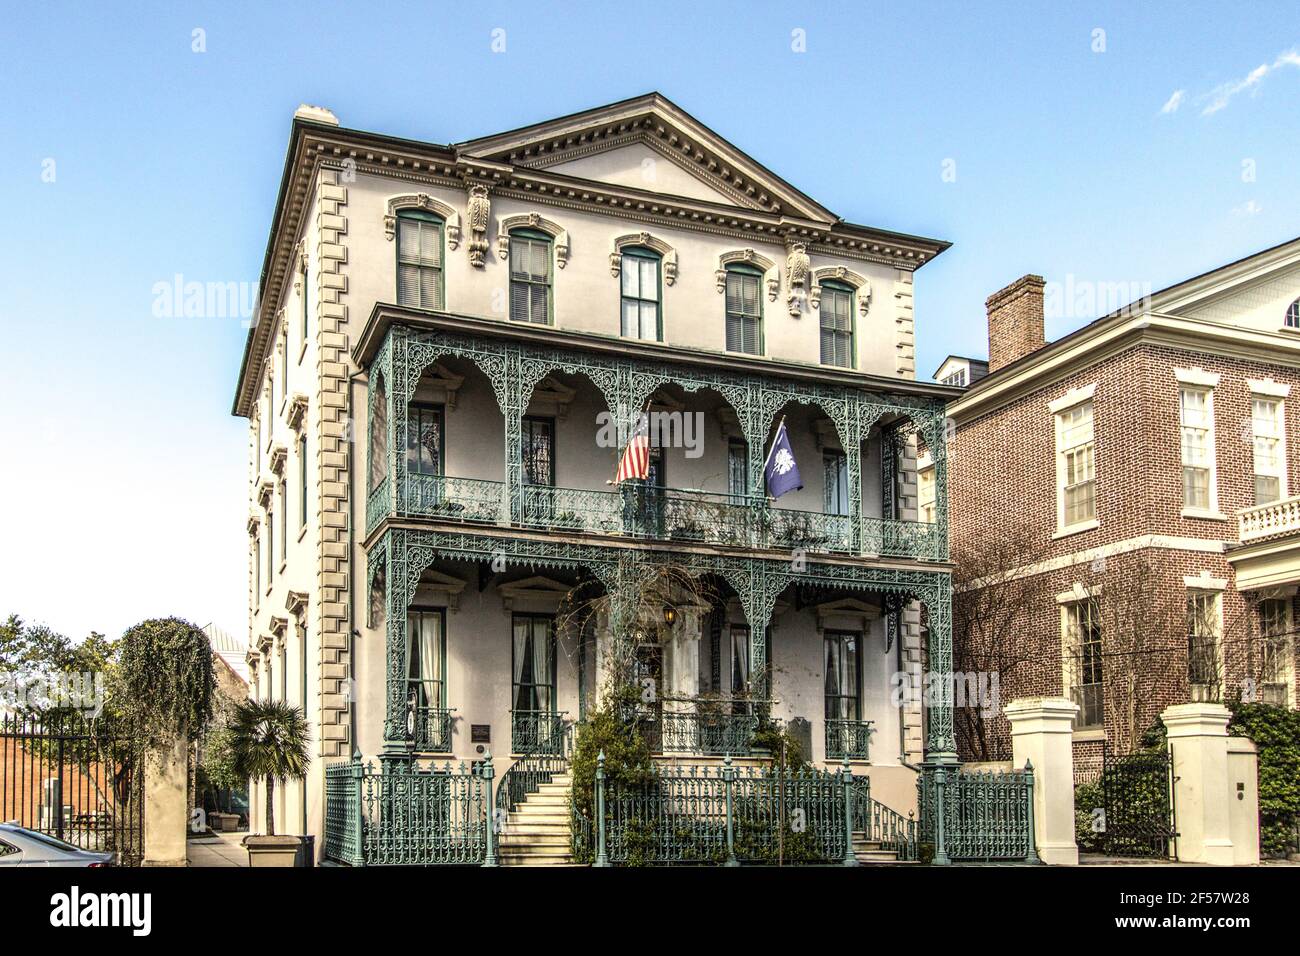 Charleston, South Carolina, USA - February 20, 2021: Exterior of famous historical 18th century home in the heart of the historical downtown district. Stock Photo